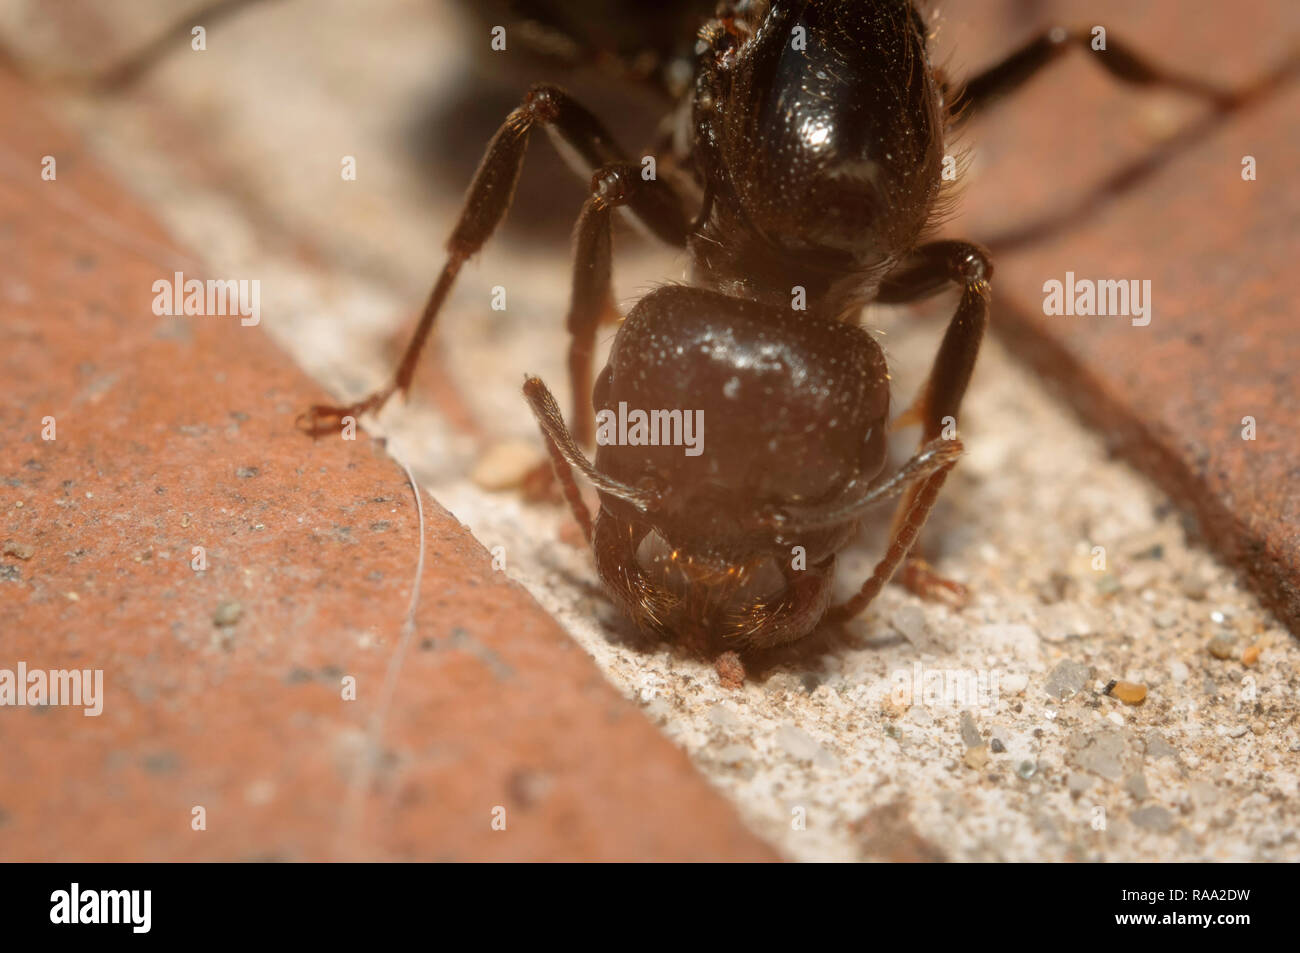 Carpenter Ant with open fangs searching for food on stone floor Stock Photo